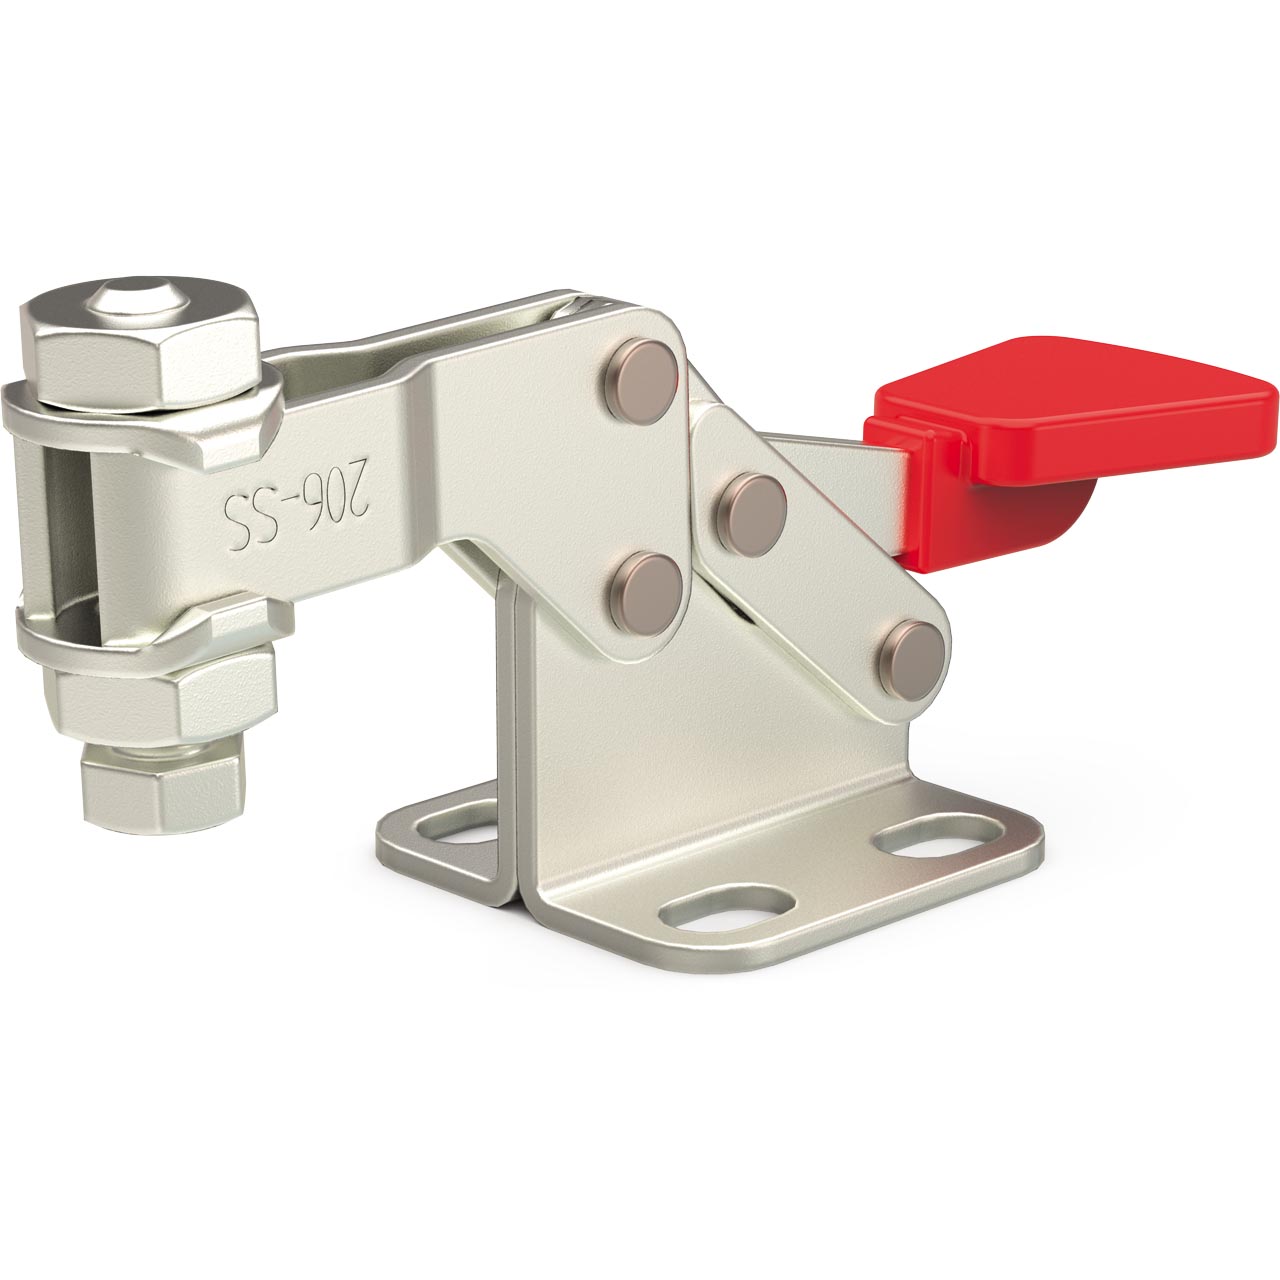 DE-STA-CO 206-SS Horizontal Handle Hold Down Action Clamp 